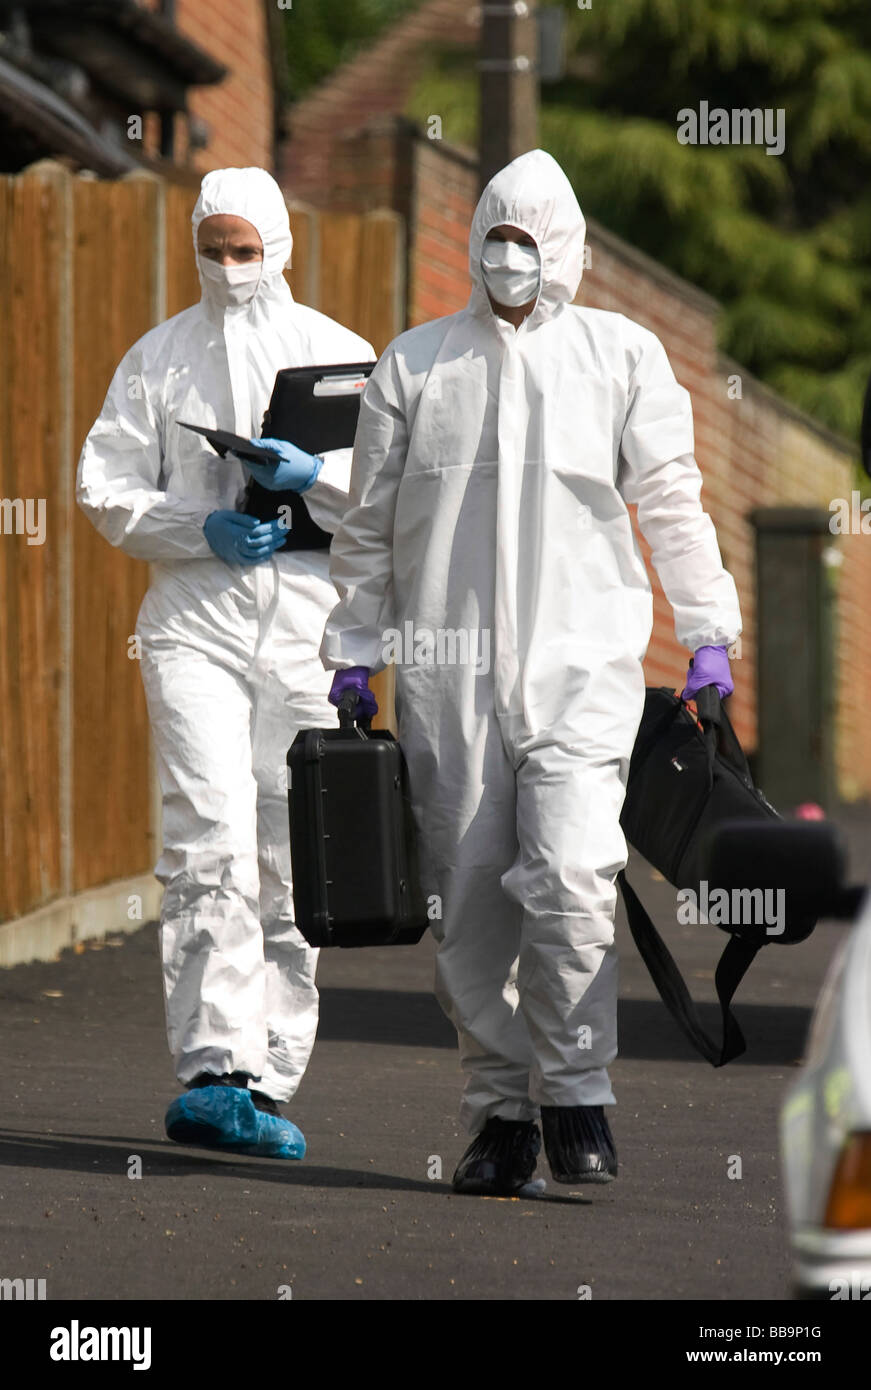 Forensic Officers from the Hertfordshire and Bedforshire Forensic Specialist Units arrive at the scene of a triple homicide Stock Photo